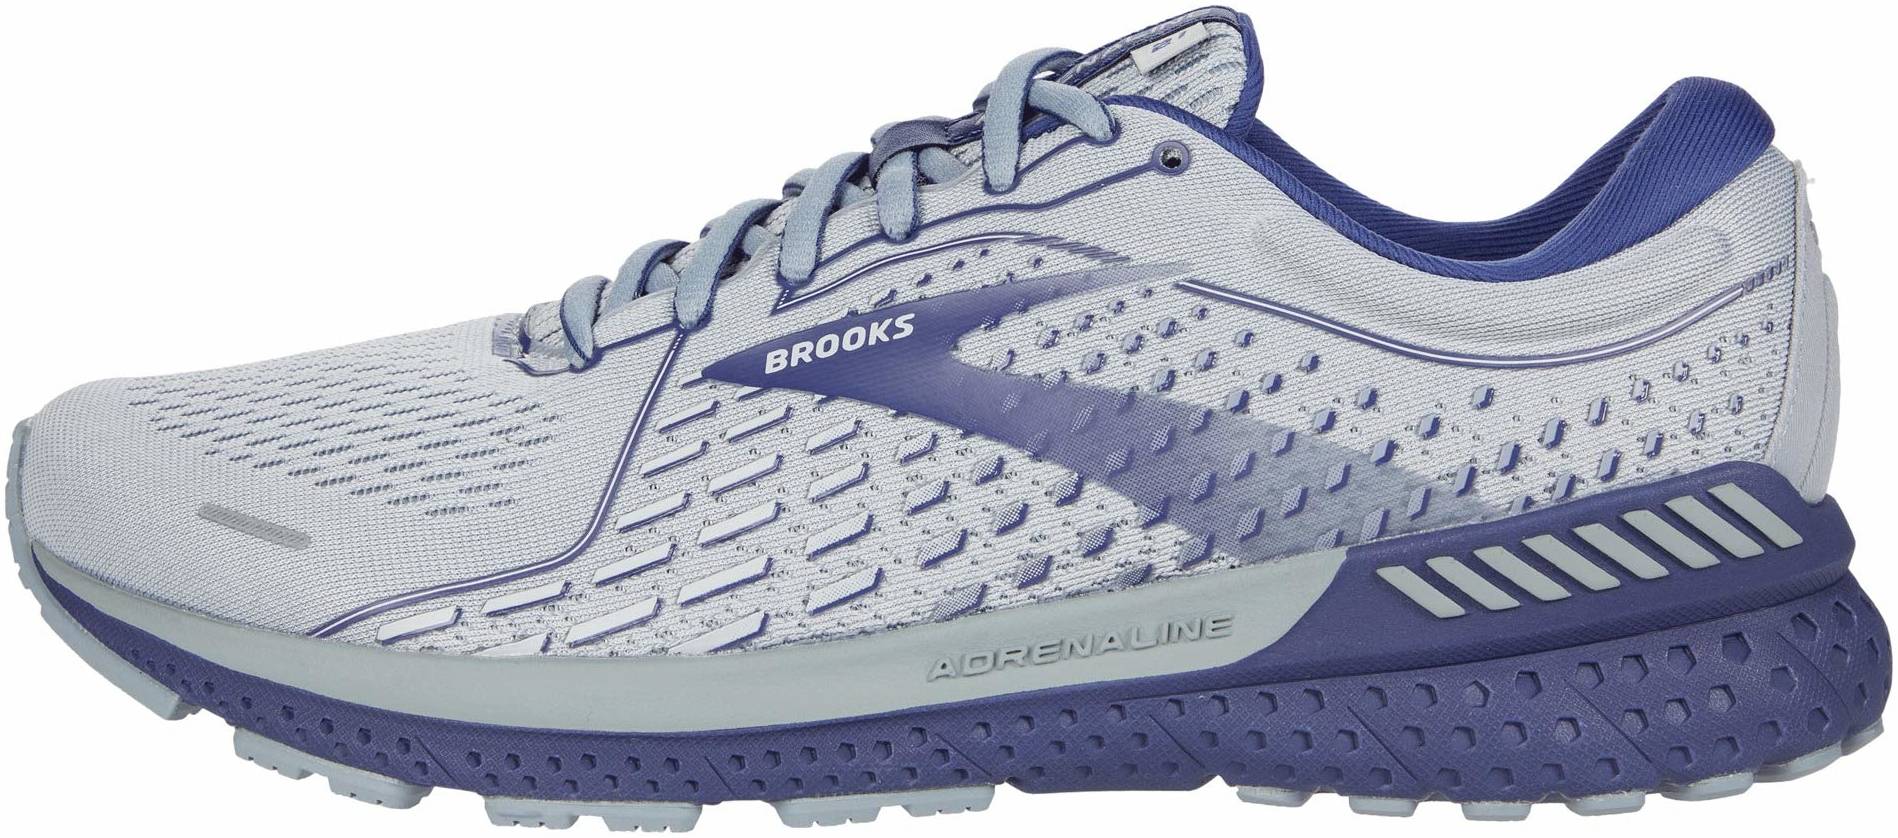 brooks stability running shoes